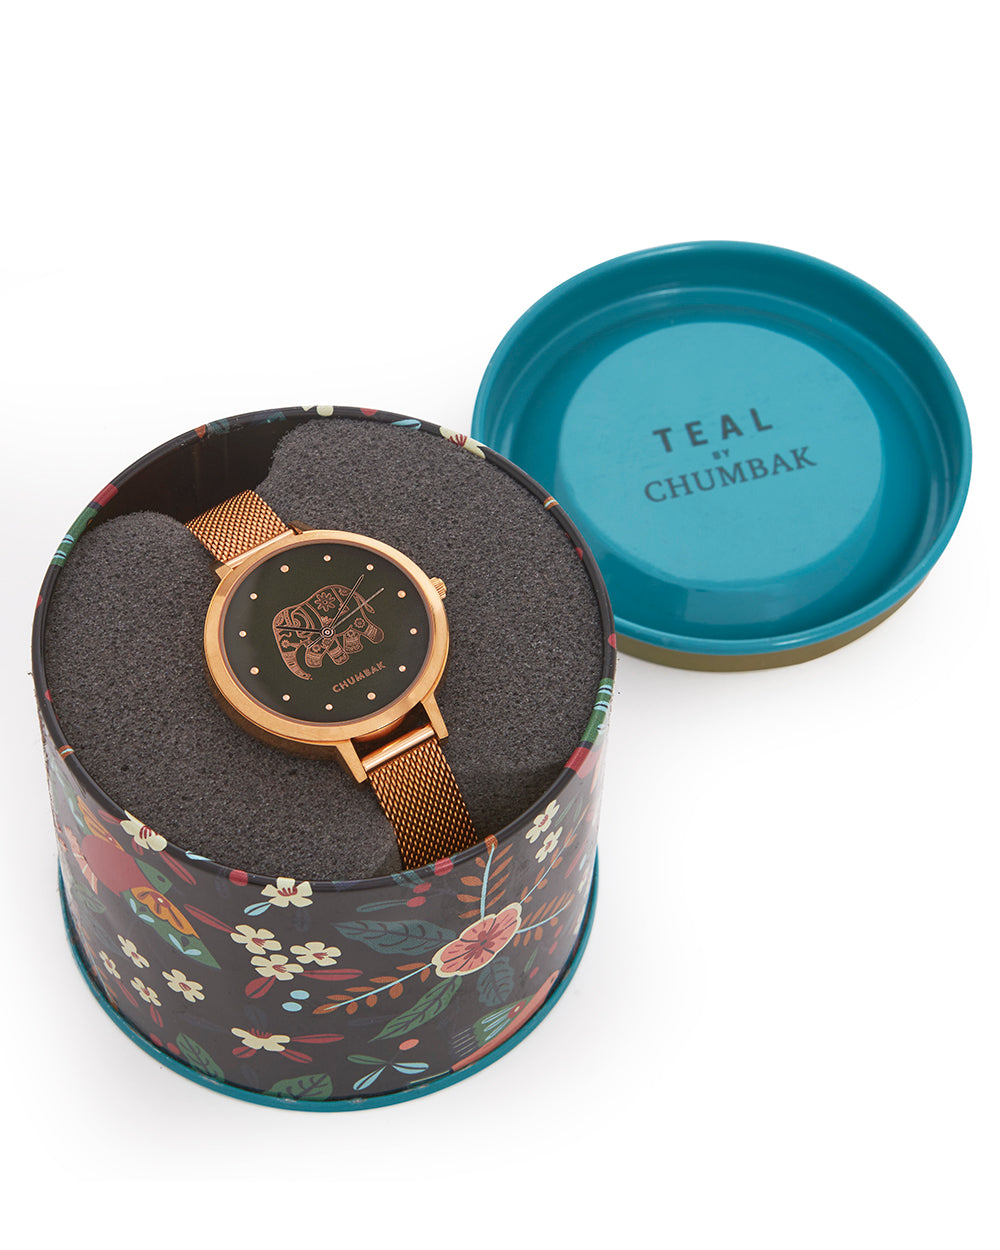 Teal by Chumbak Carnival Elephant Watch,Stainless Steel Mesh Strap